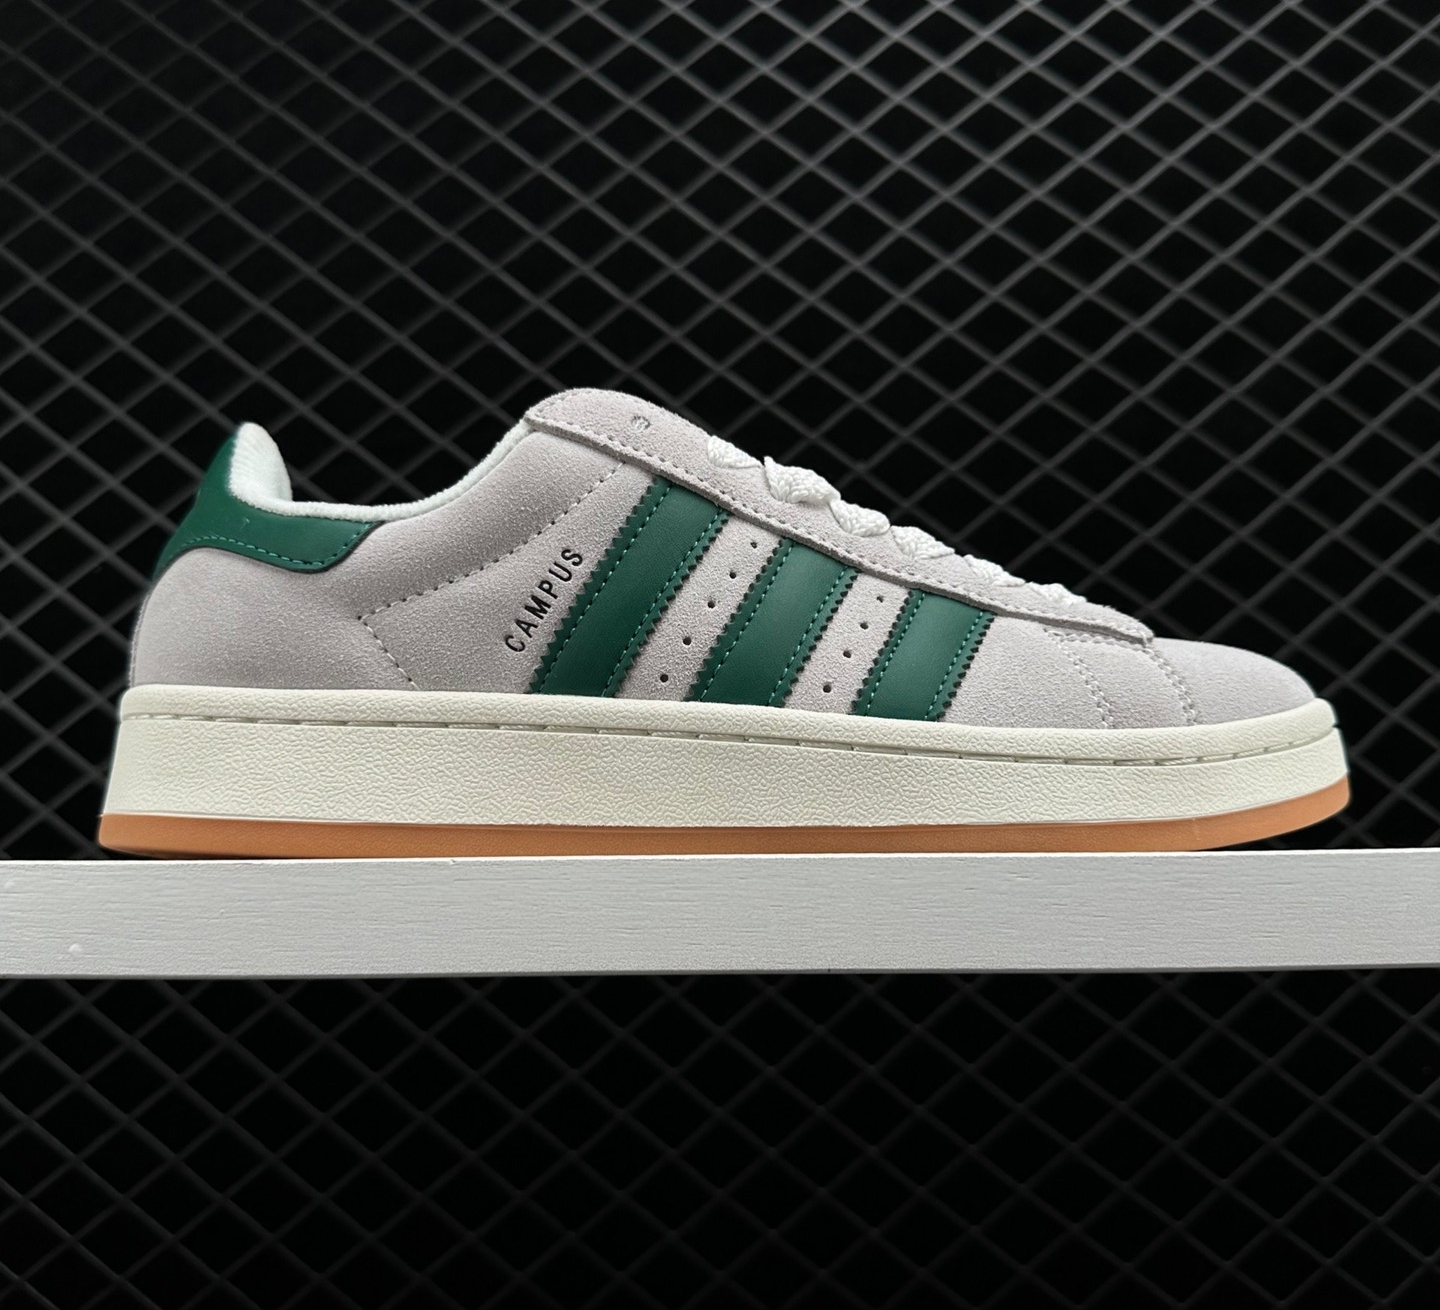 Adidas Originals Campus 00s White Green GY0038 - Classic Style & Fresh Color - Limited Stock